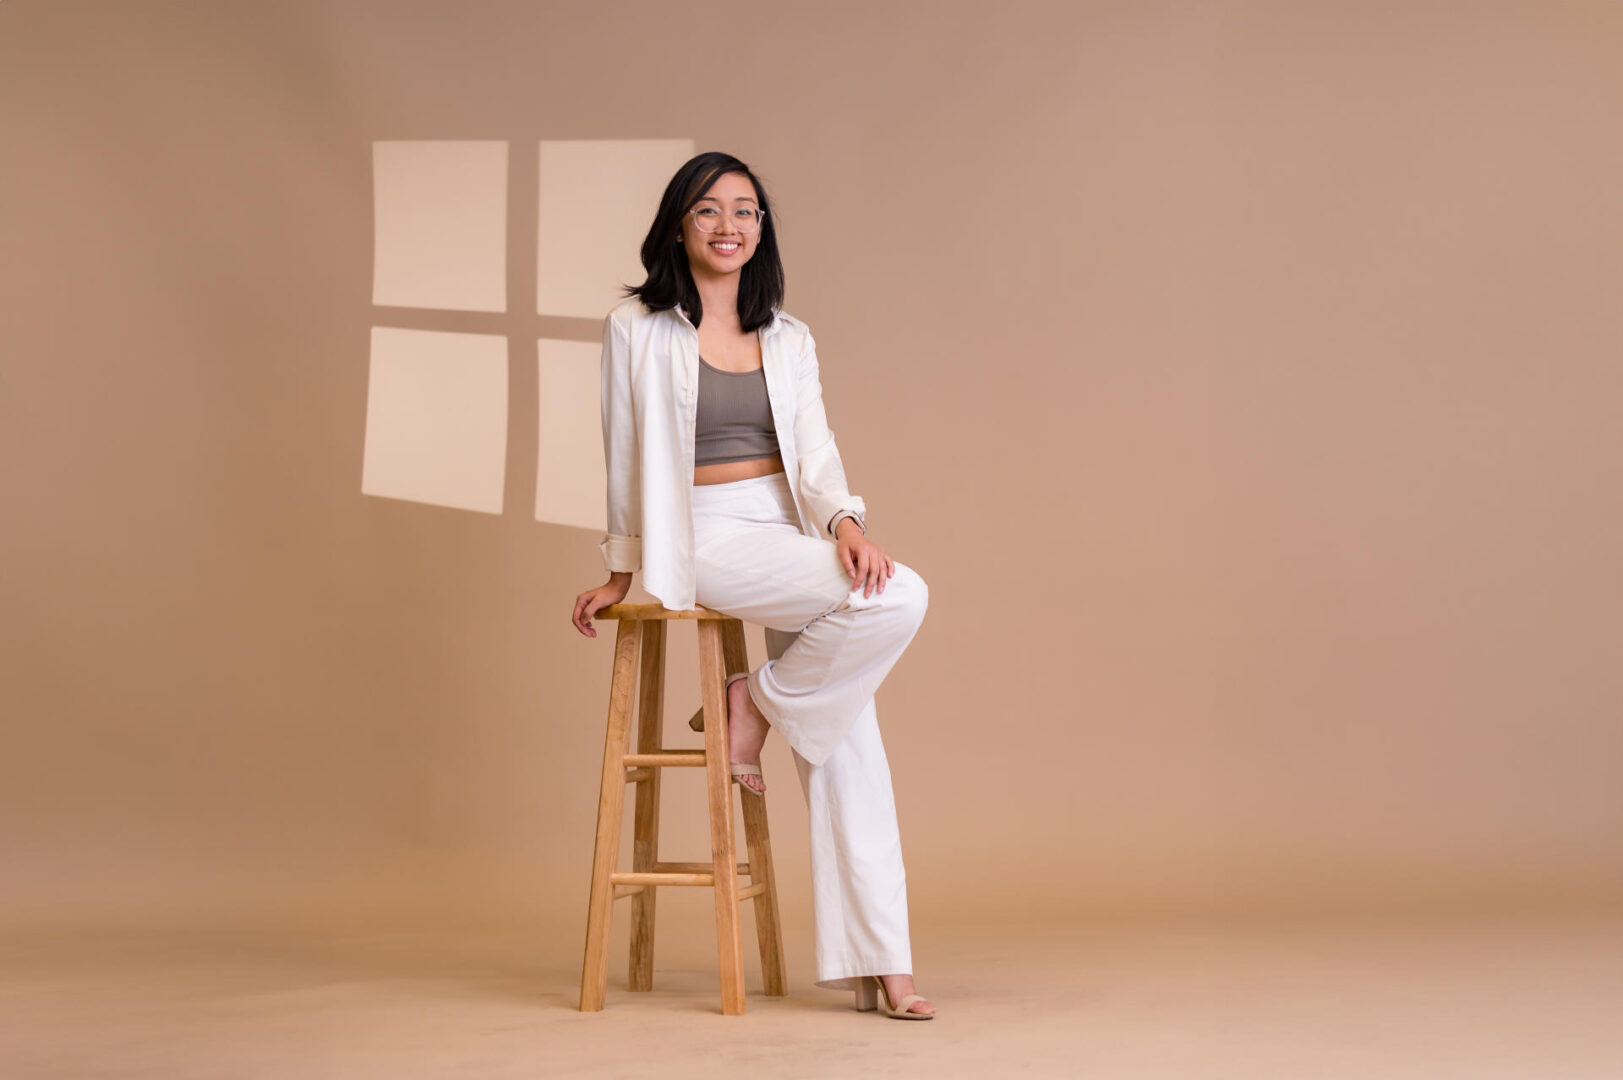 Marifren Francisco, wearing a white suit, sits on a stool with one leg down in front of a neutral background during a photoshoot.